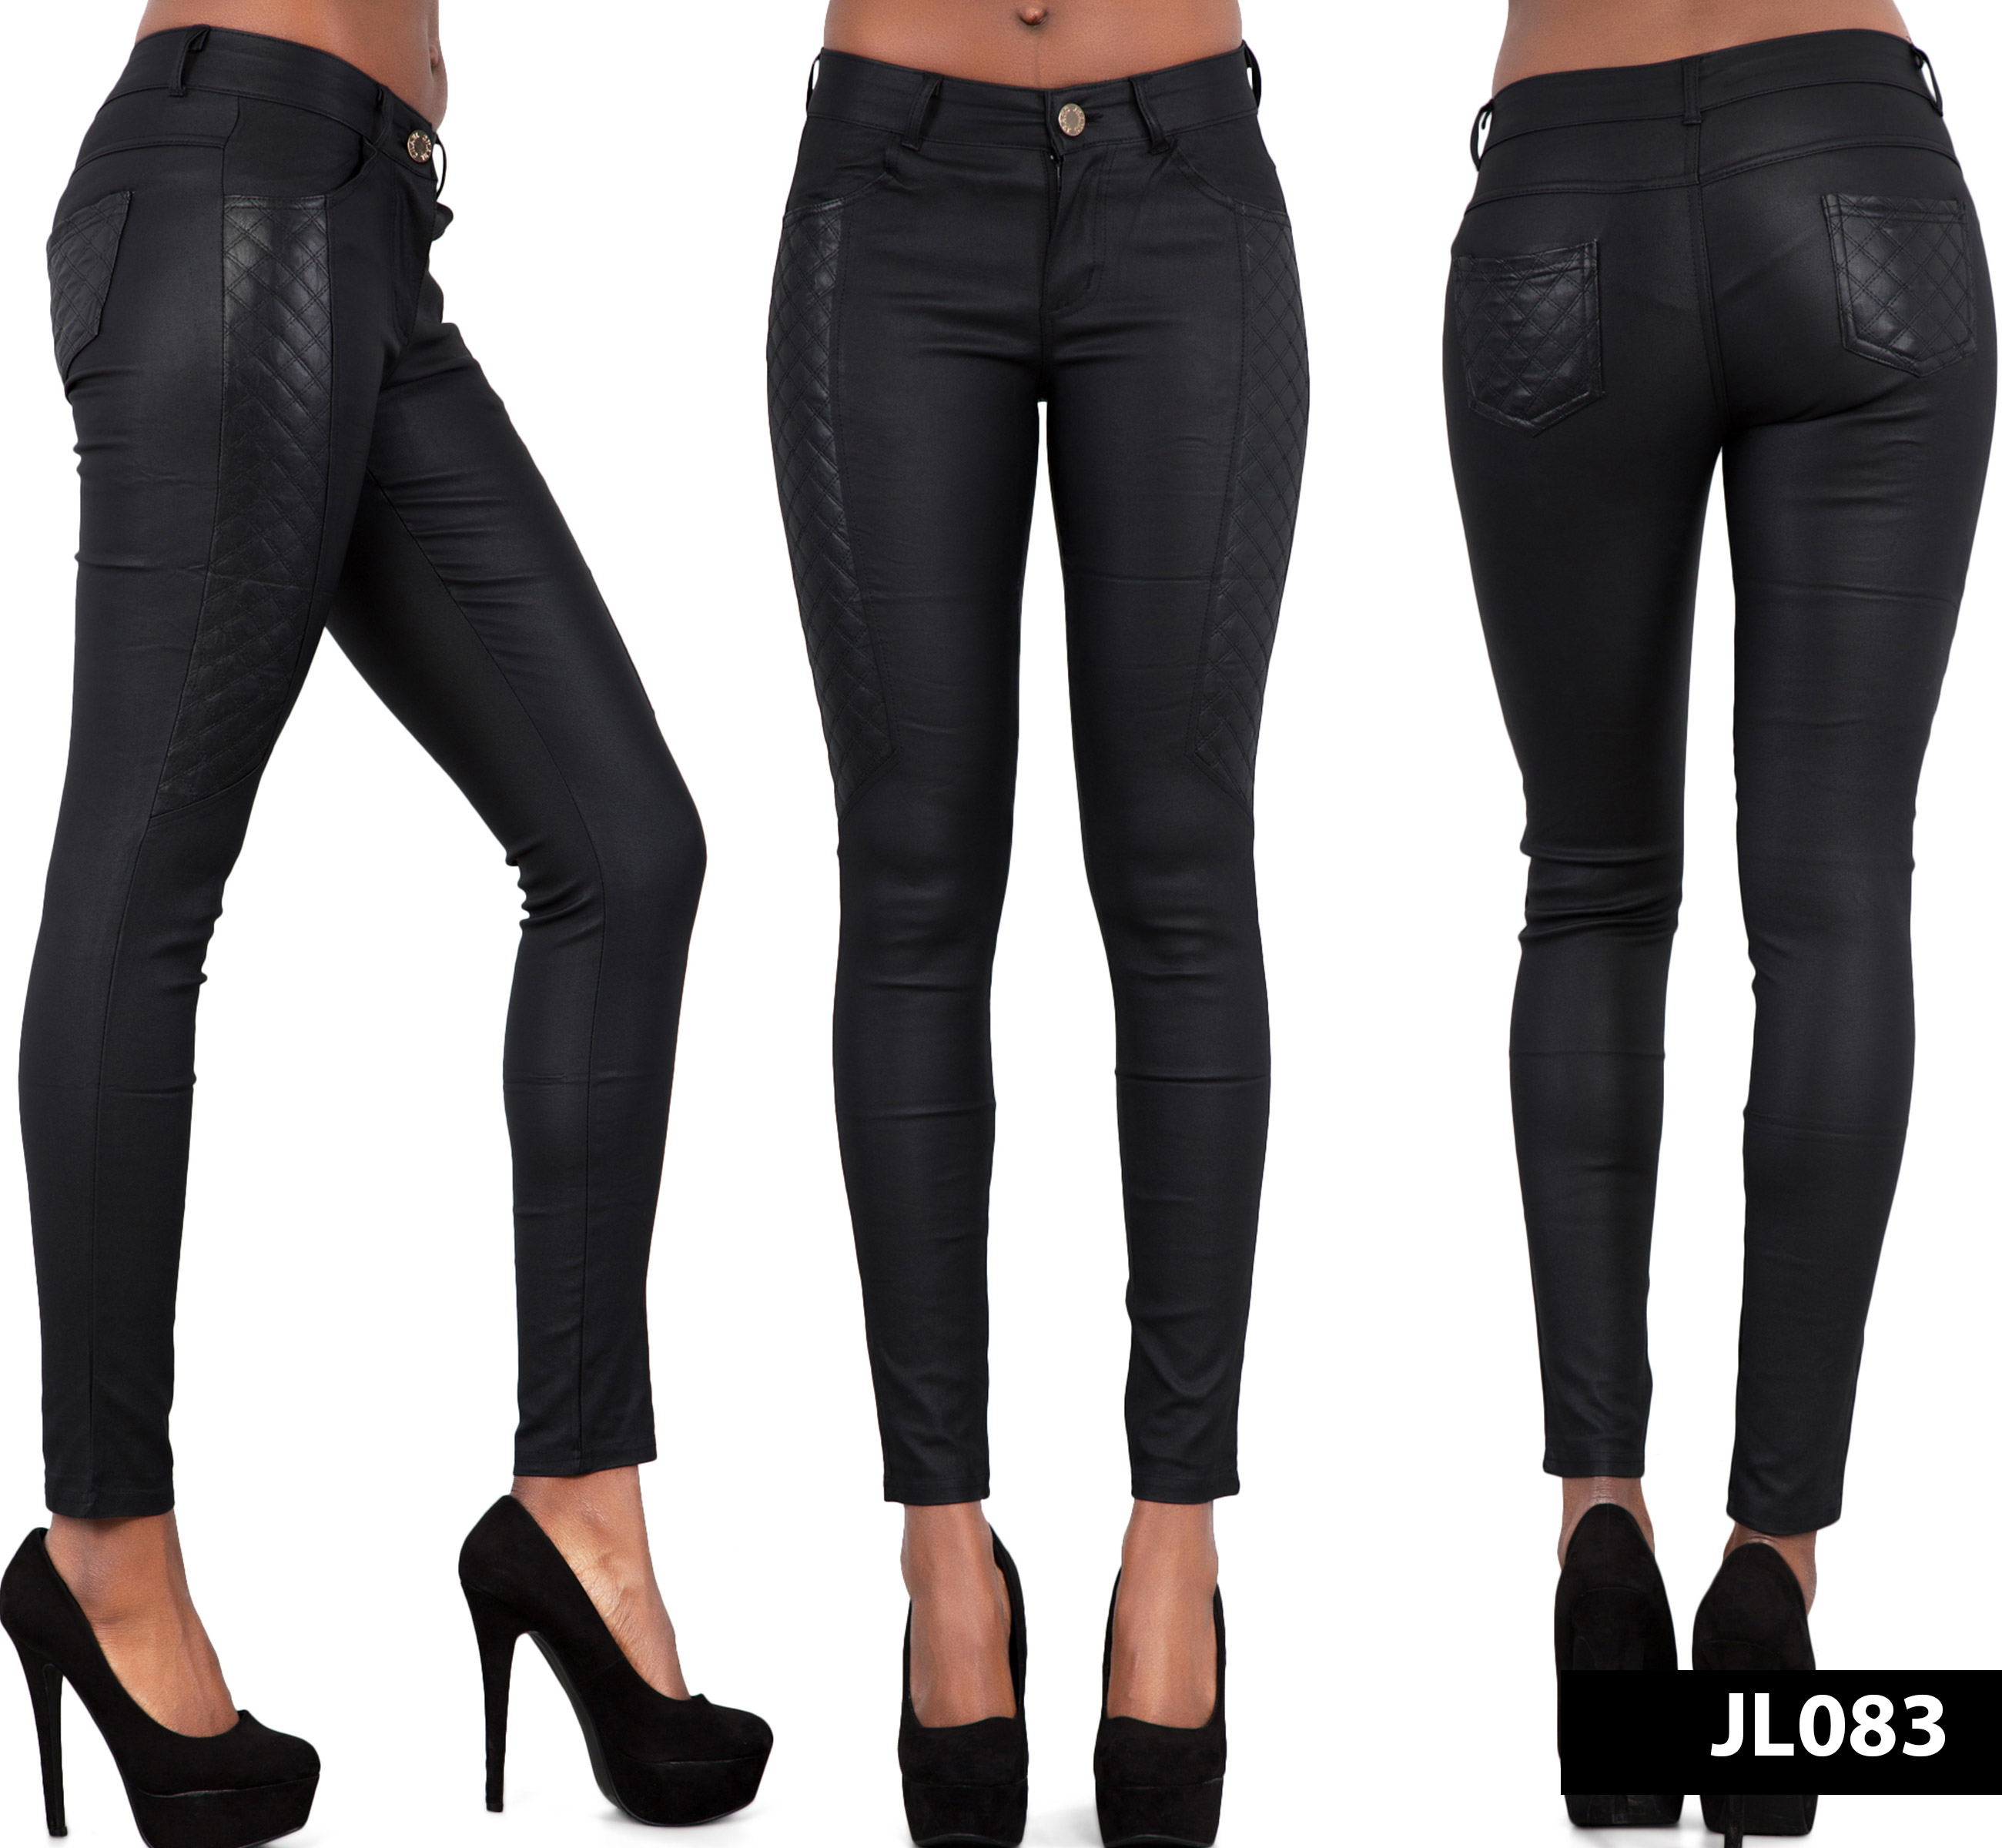 NEW LADIES WOMEN HIGH WAIST LEGGINGS LEATHER LOOK STRETCHY TROUSERS ...